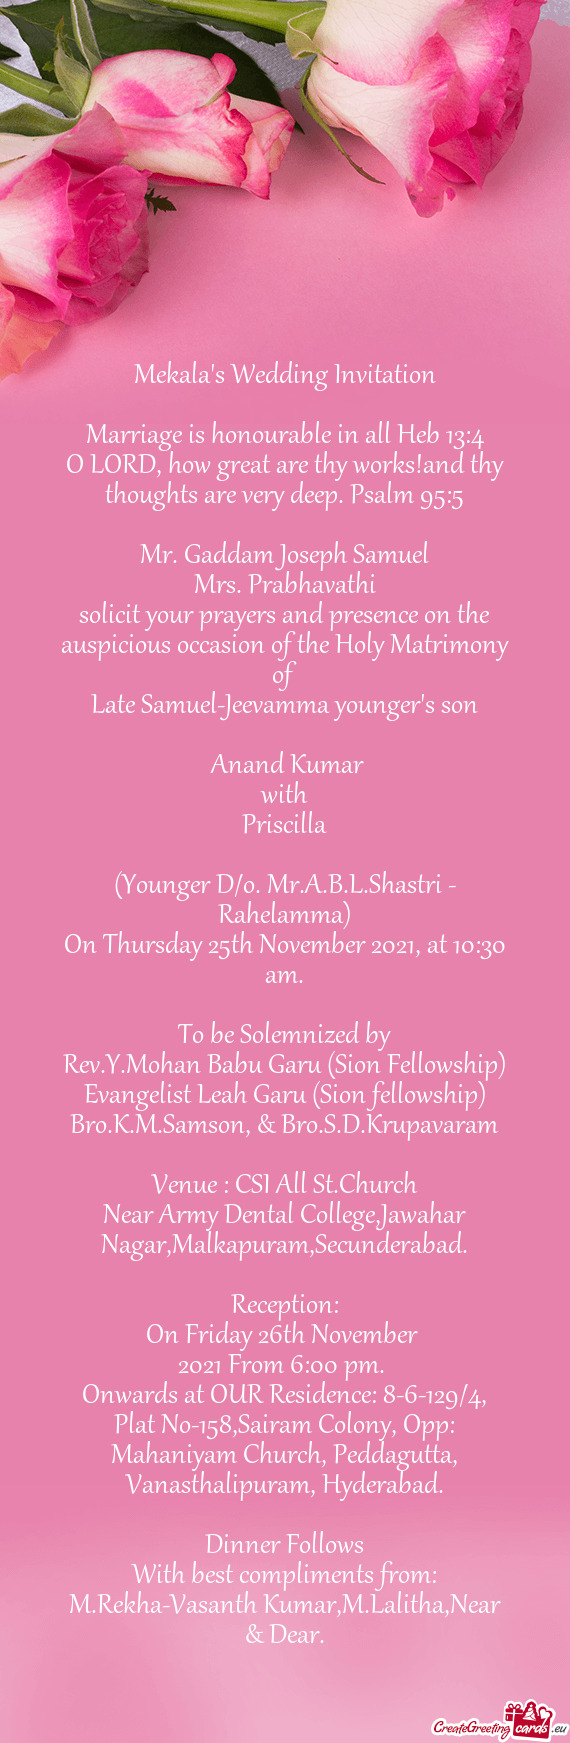 Solicit your prayers and presence on the auspicious occasion of the Holy Matrimony of